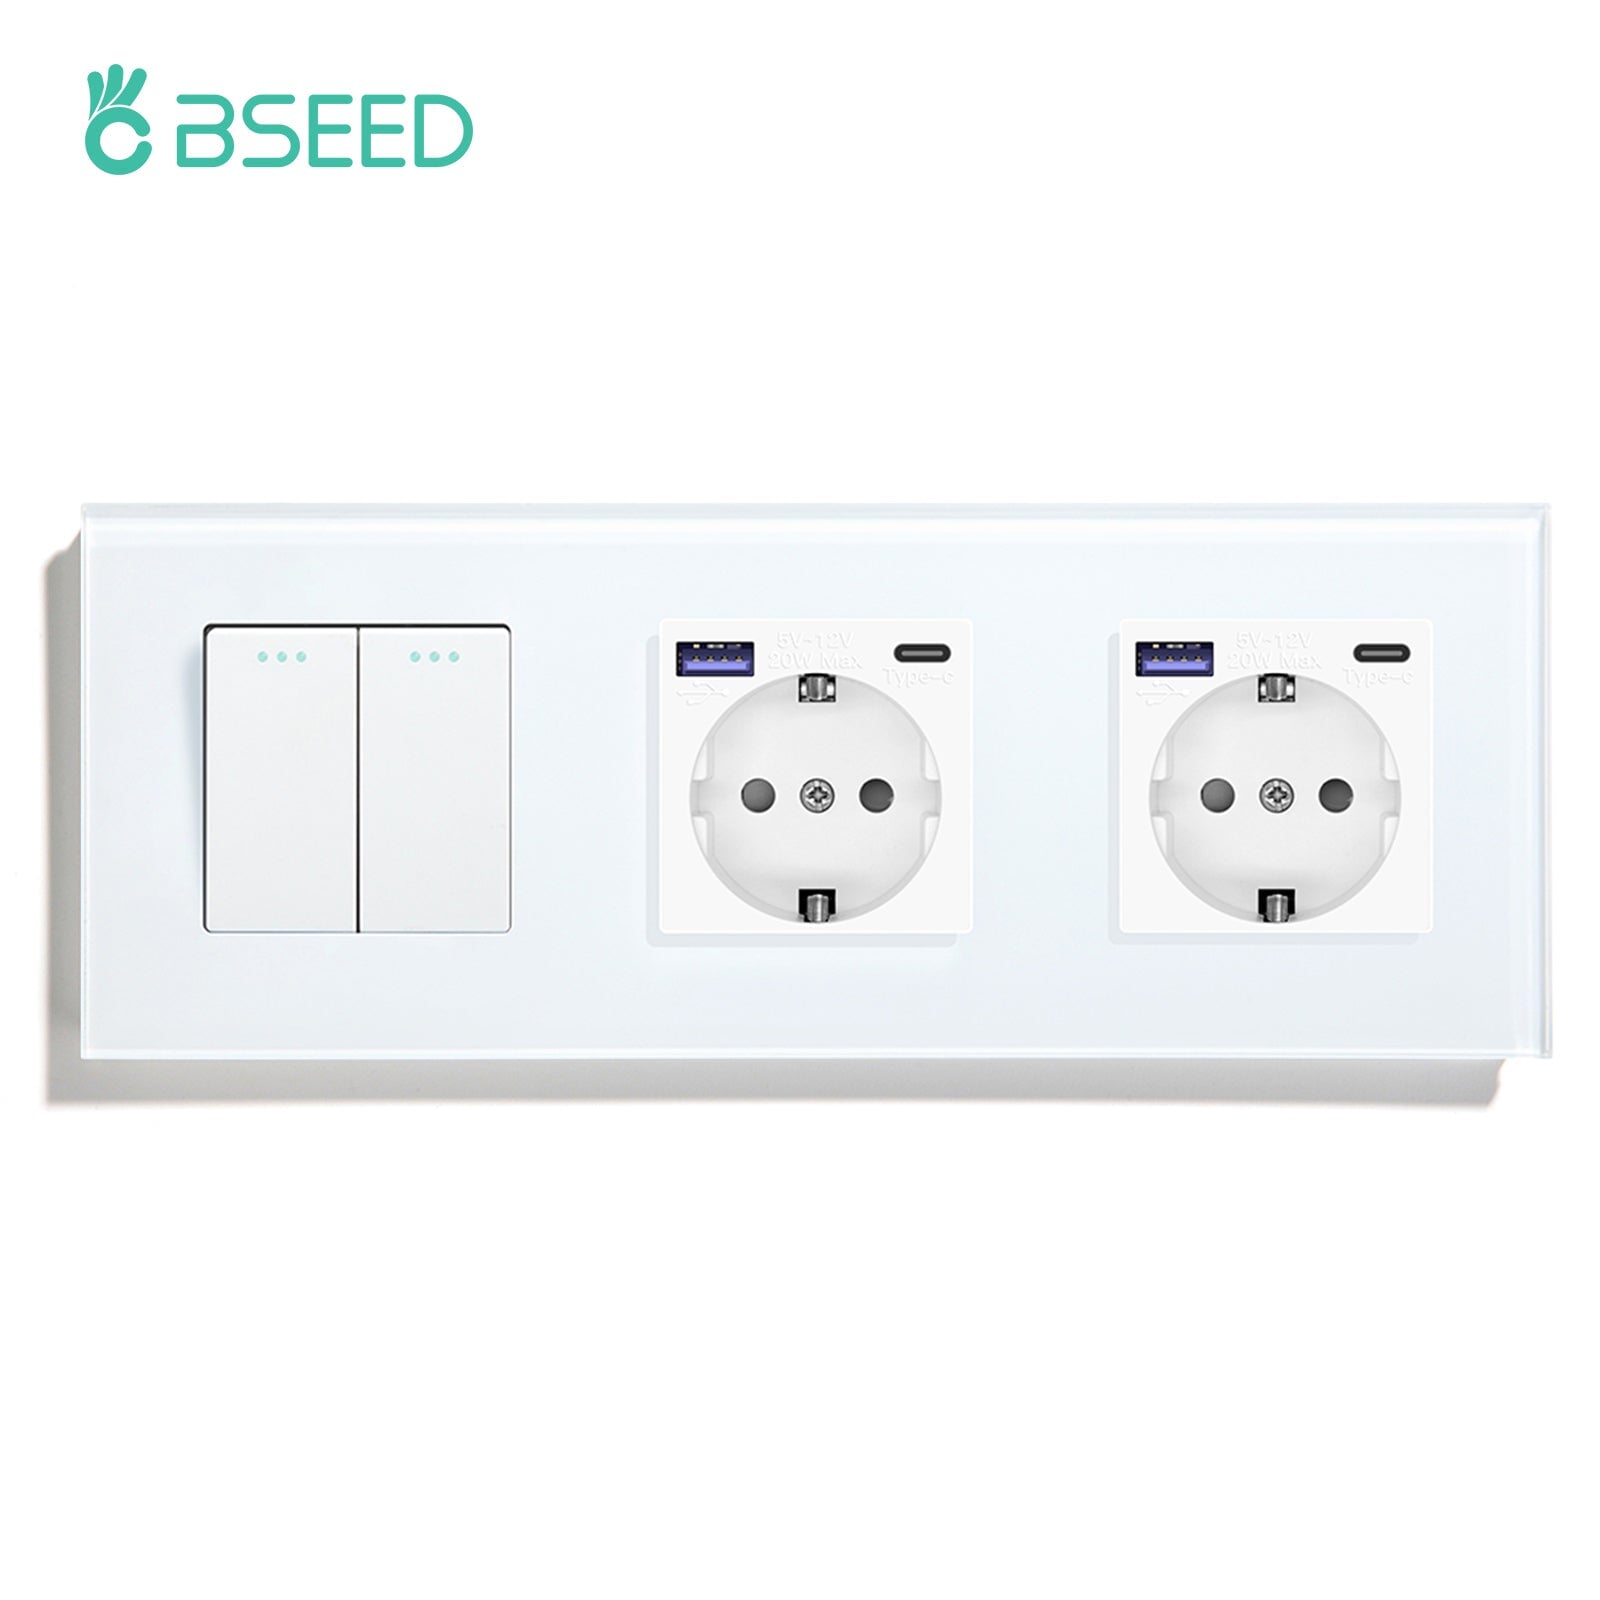 BSEED 1/2/3 Gang 1/2 Way Light Switch With Normal Eu Socket With fast charge USB-c Power Outlets & Sockets Bseedswitch White 2Gang 1Way